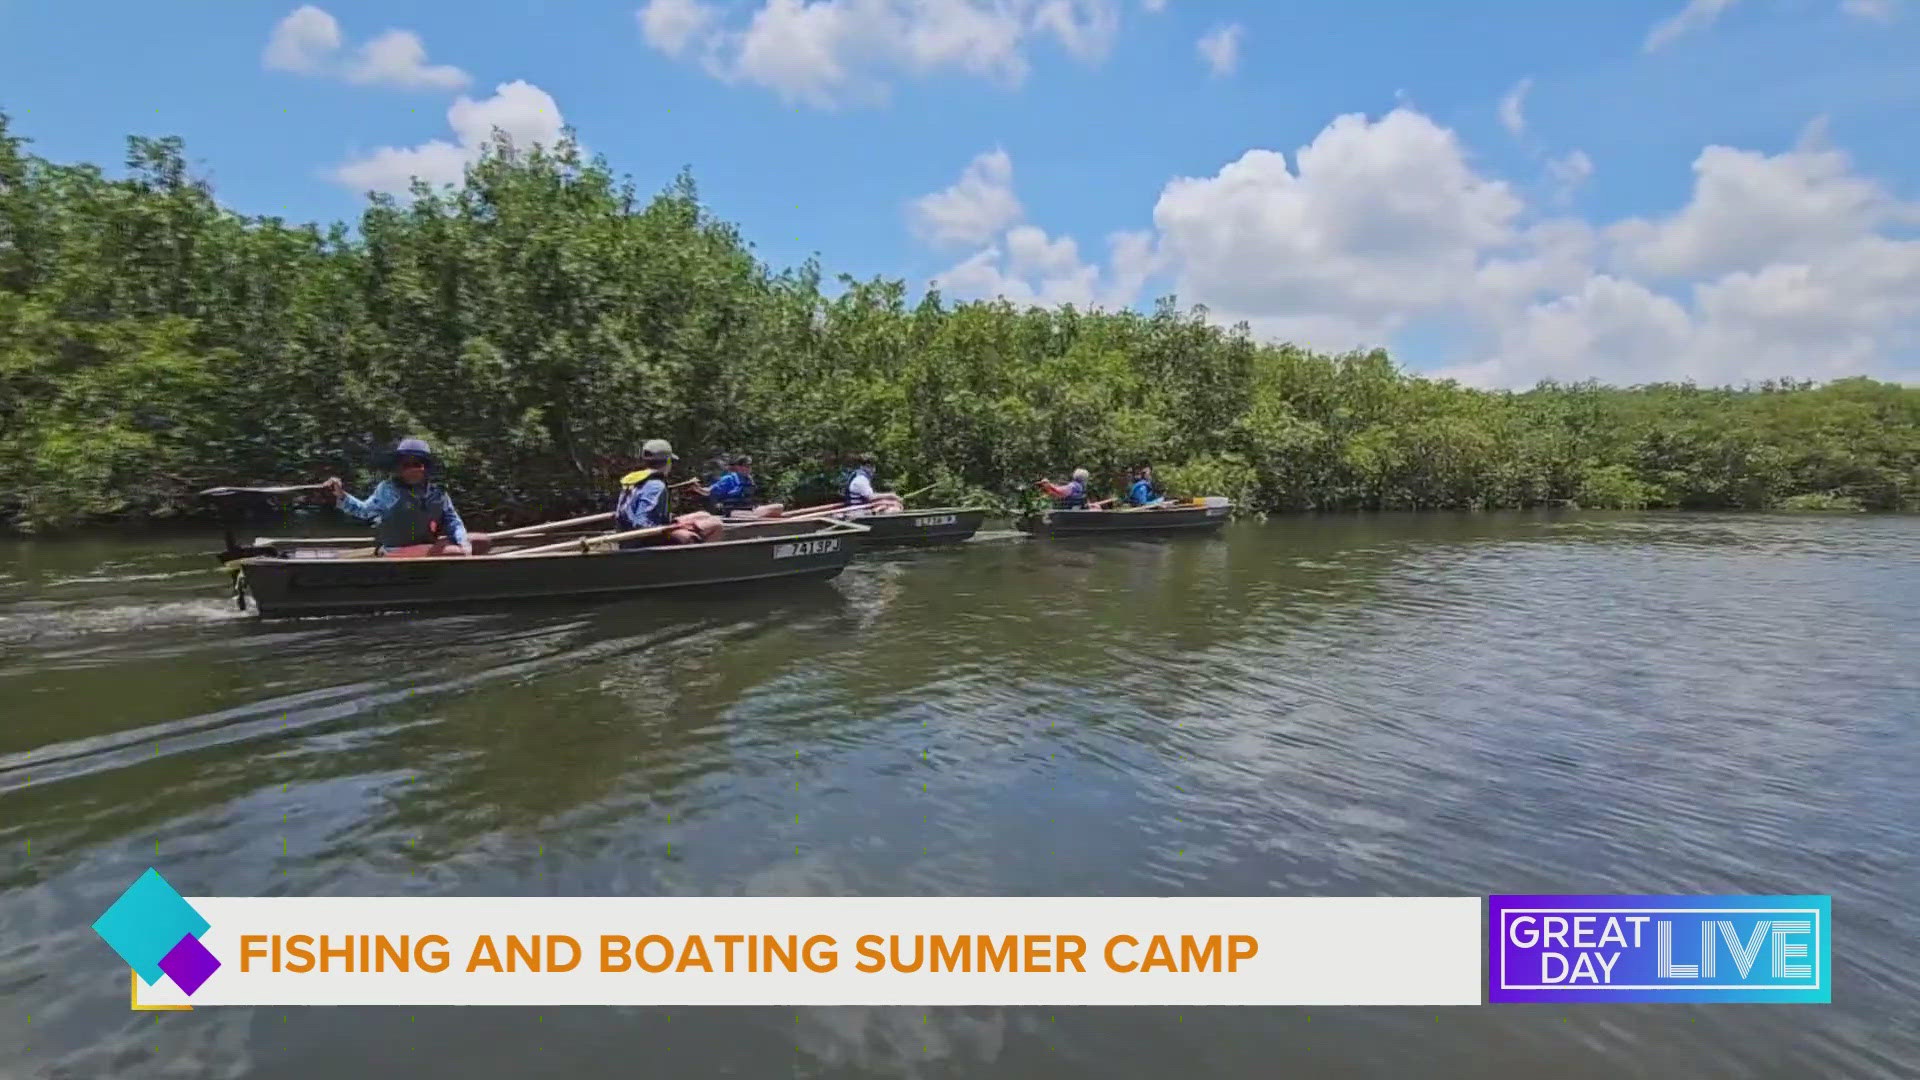 Tampa Bay Kayak Anglers is hosting a fishing and boating summer camp at Mobbly Bayou Preserve in Oldsmar. For details visit www.tampabaykayakanglers.org